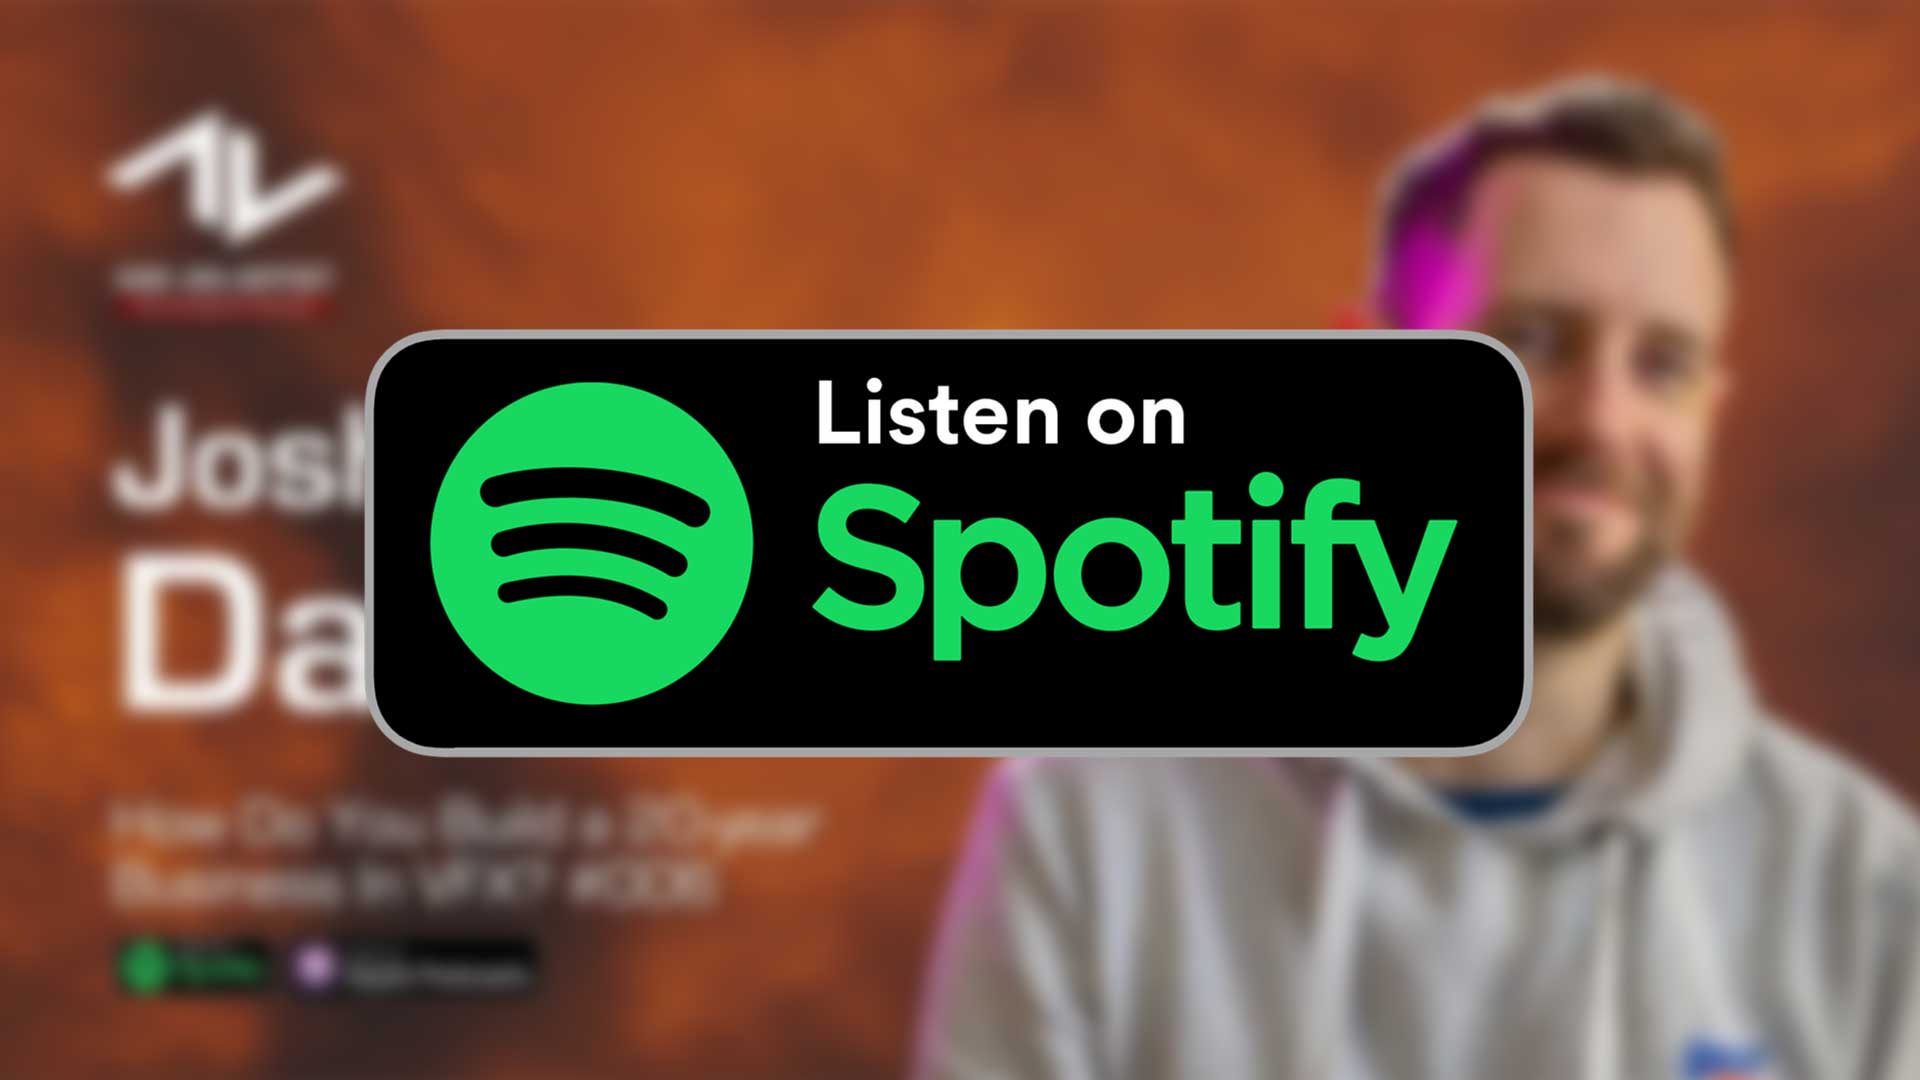 Listen to episode 6 of Ask An Artist on Spotify.